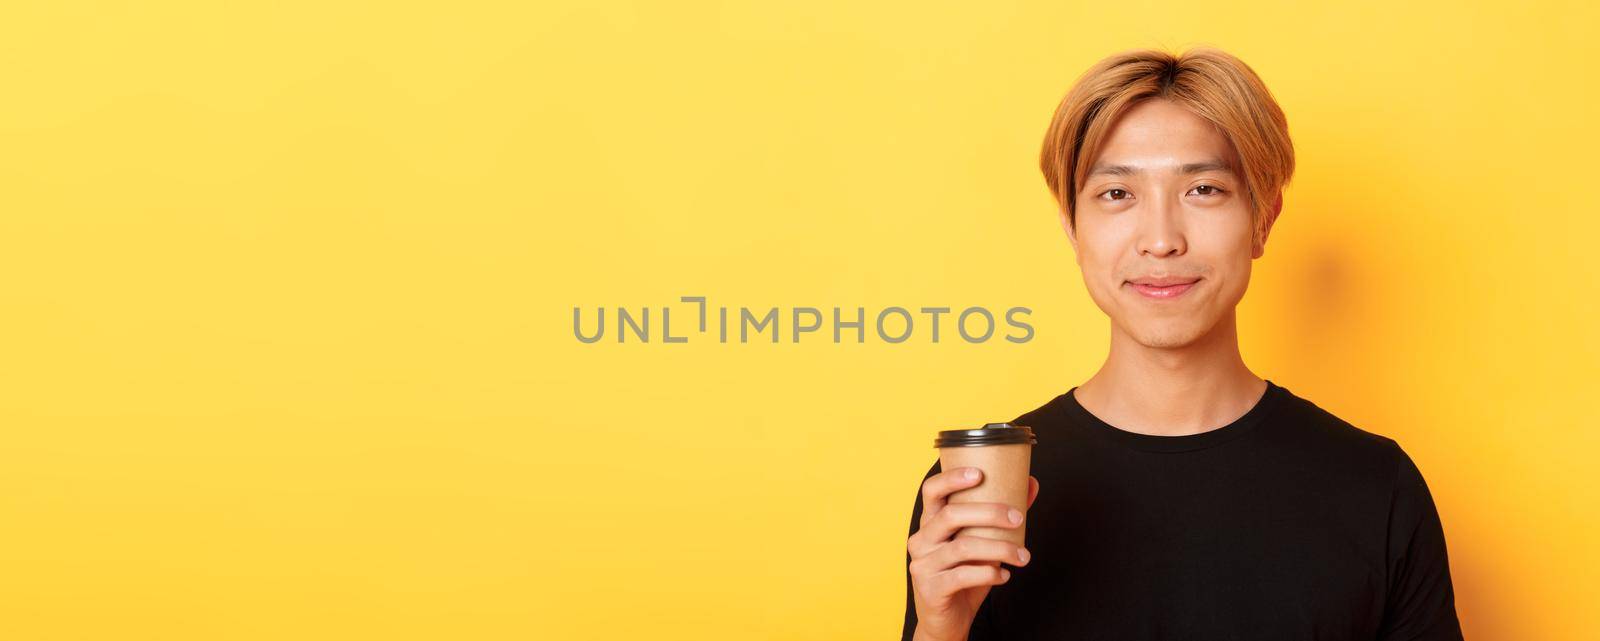 Close-up of handsome blond asian man drinking coffee and smiling pleased, standing over yellow background.